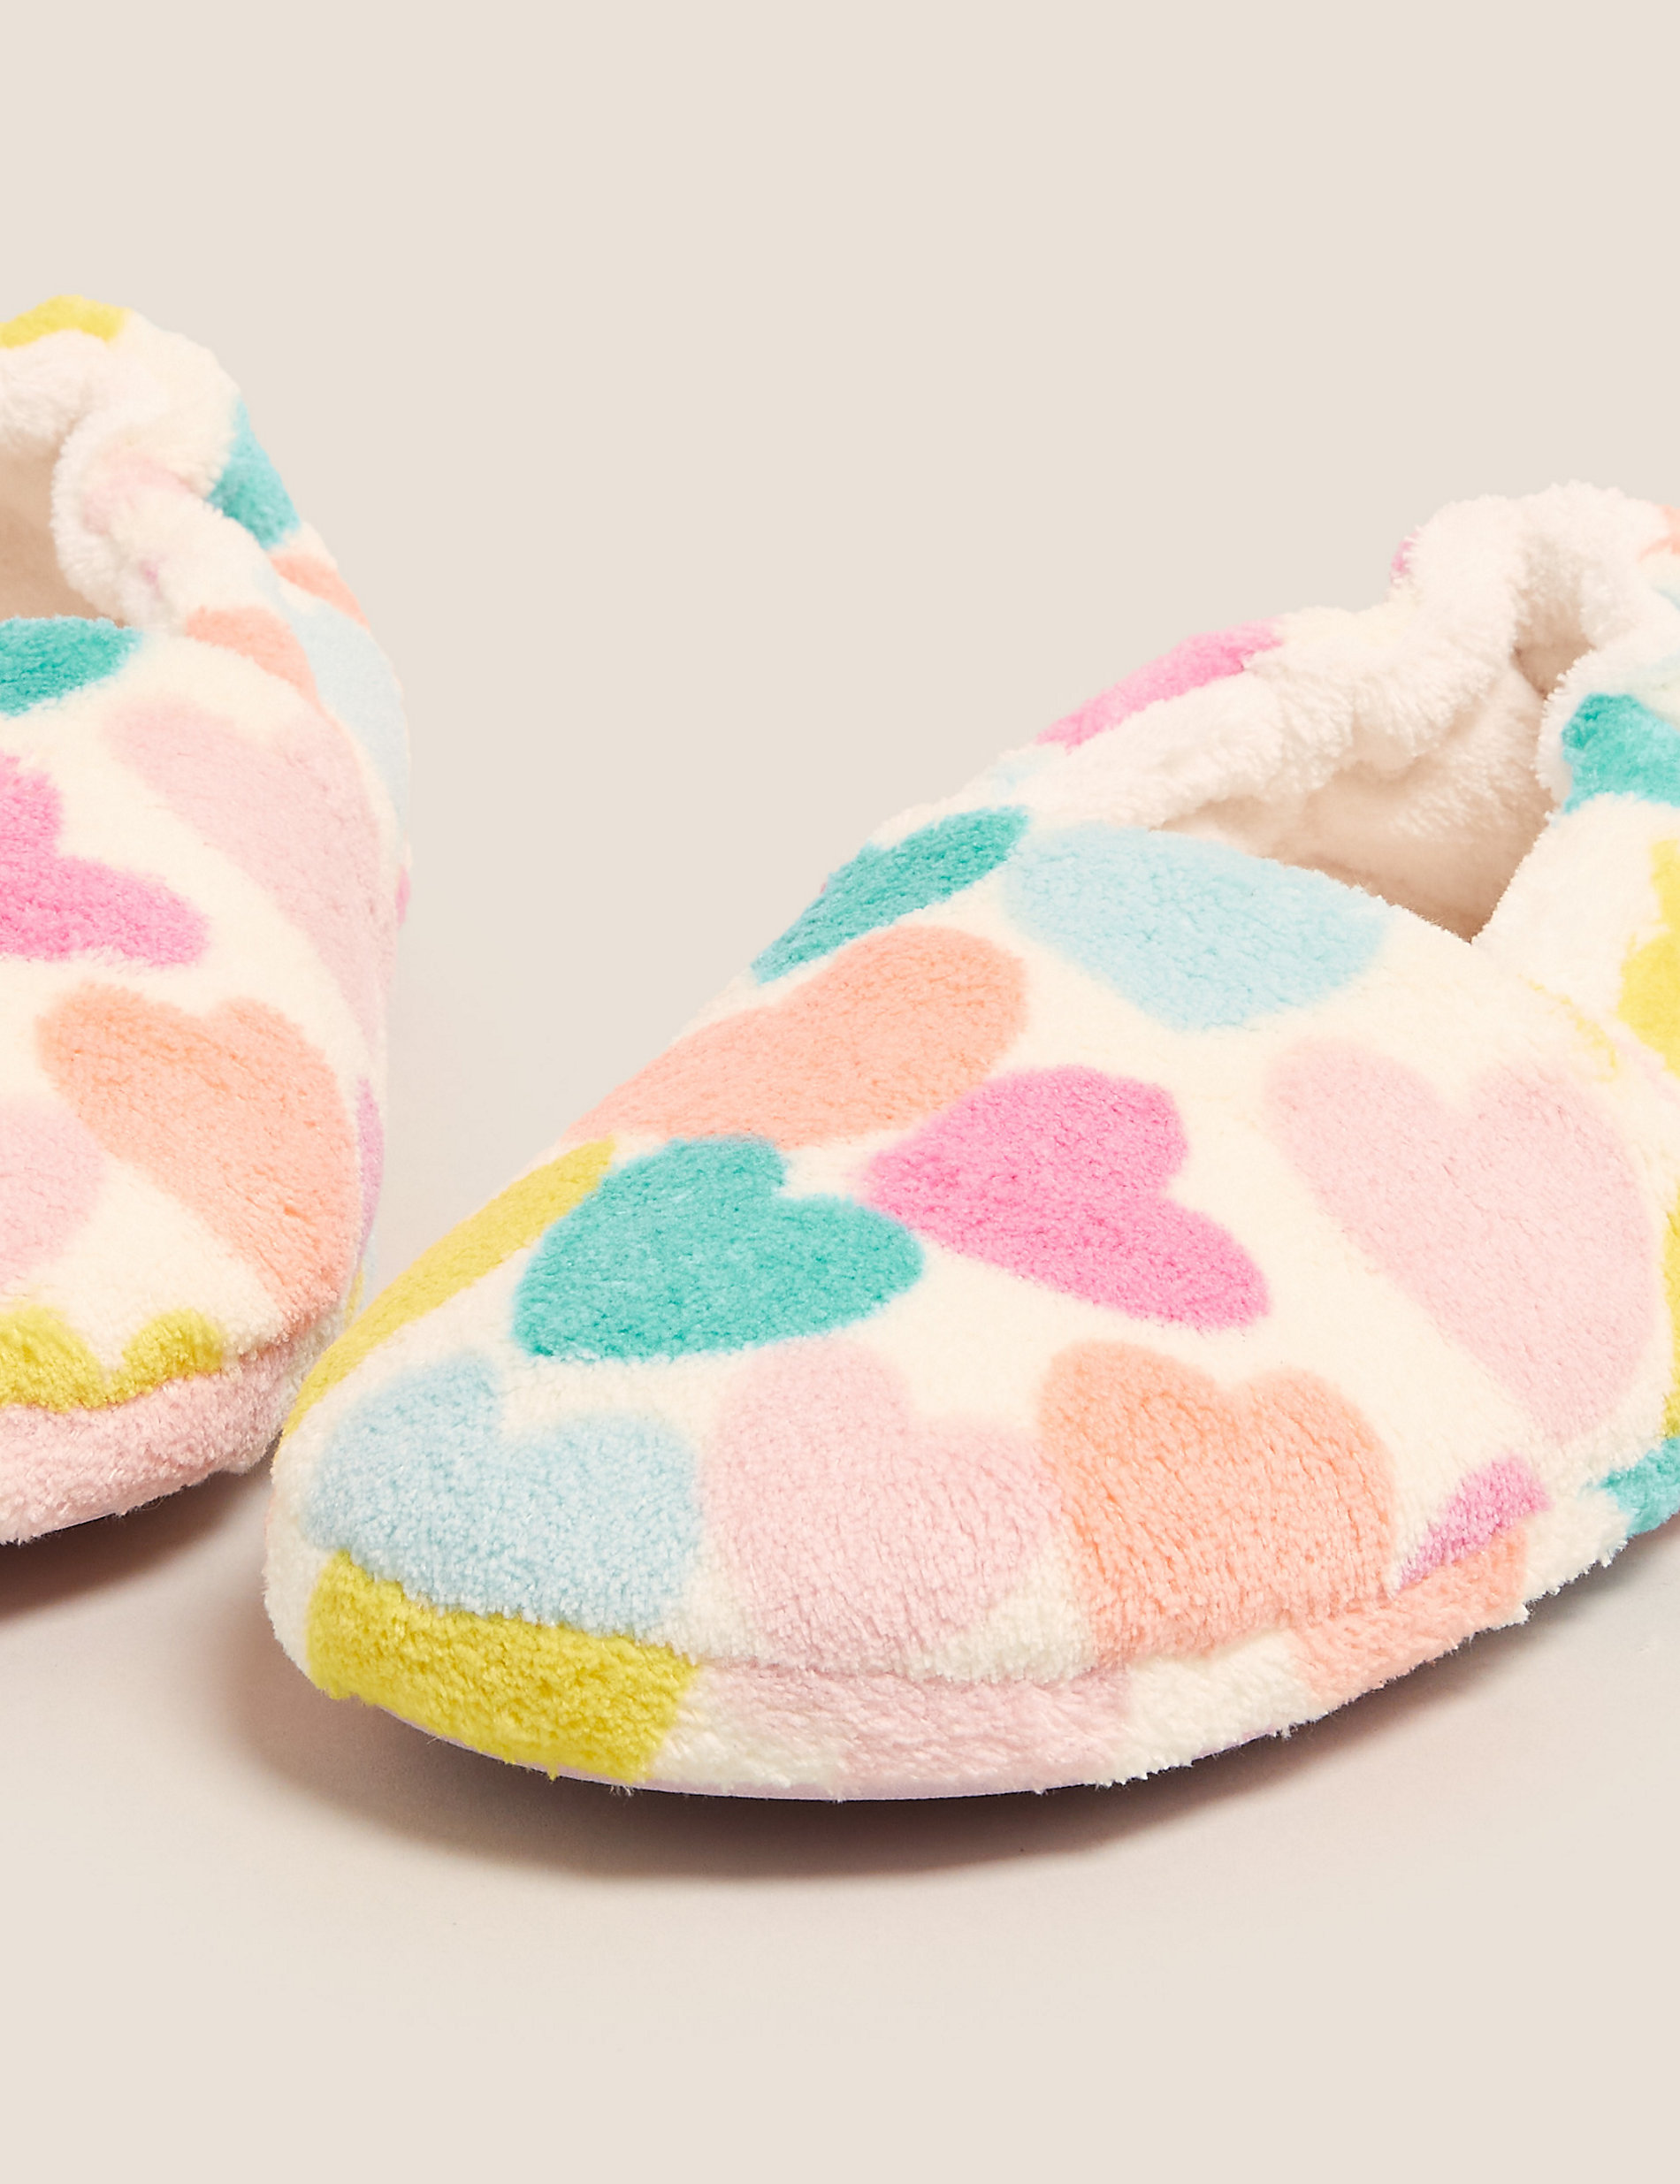 Kids' Heart Slippers (13 Small - 6 Large)